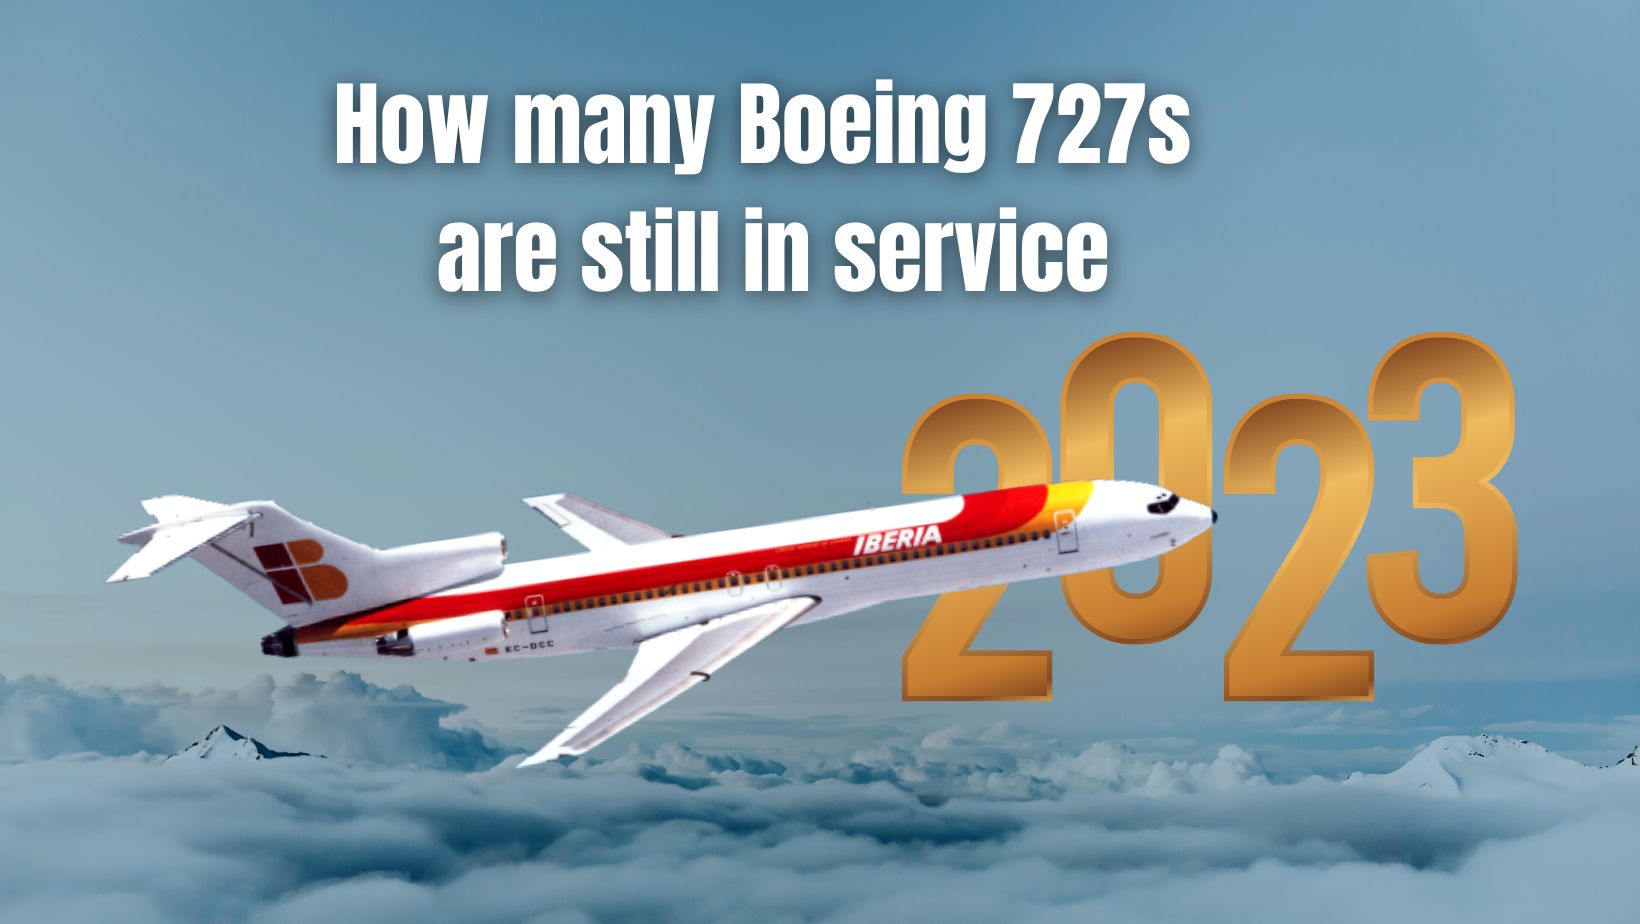 How many Boeing 727s are still in service